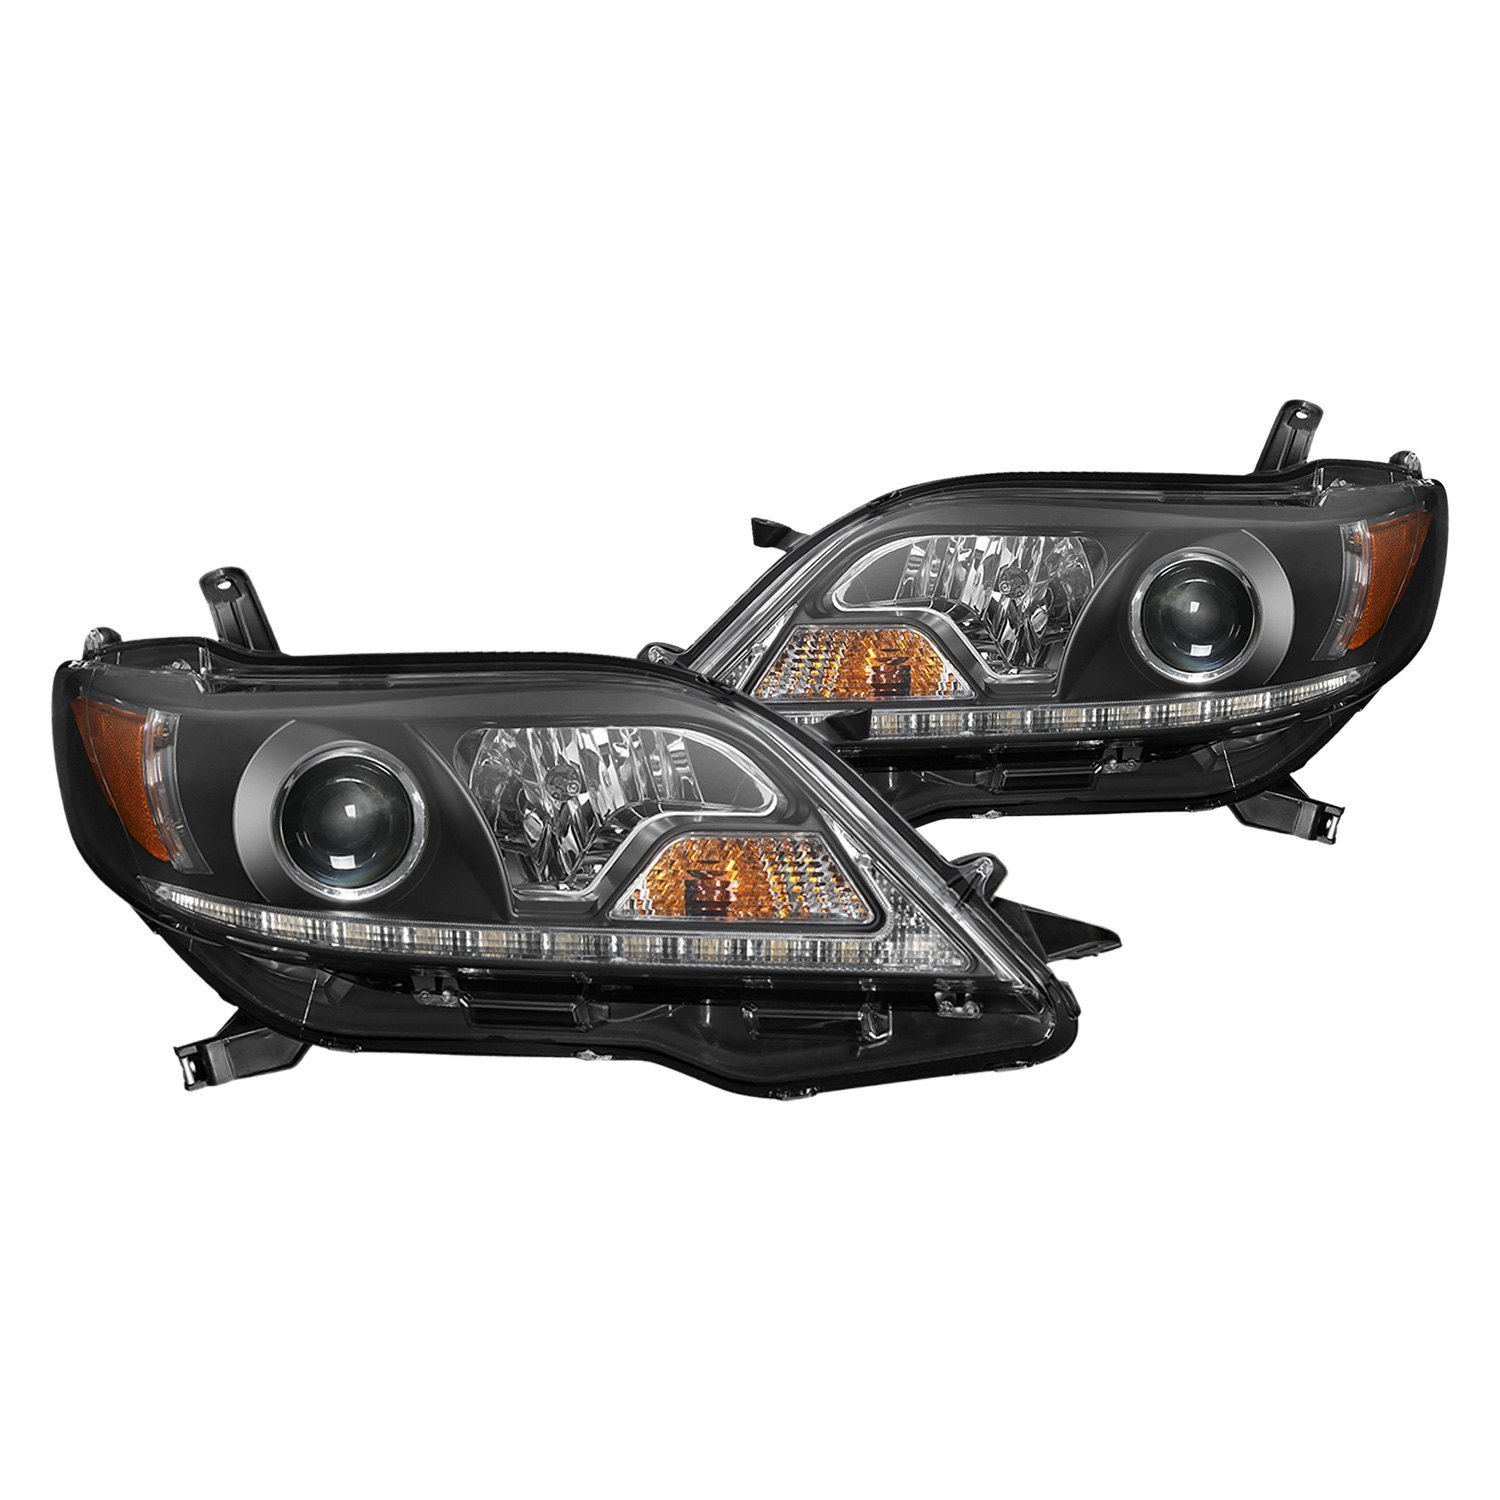 Spyder® Toyota Sienna SE with Factory Halogen Headlights 2011 Black  Headlights with LED DRL